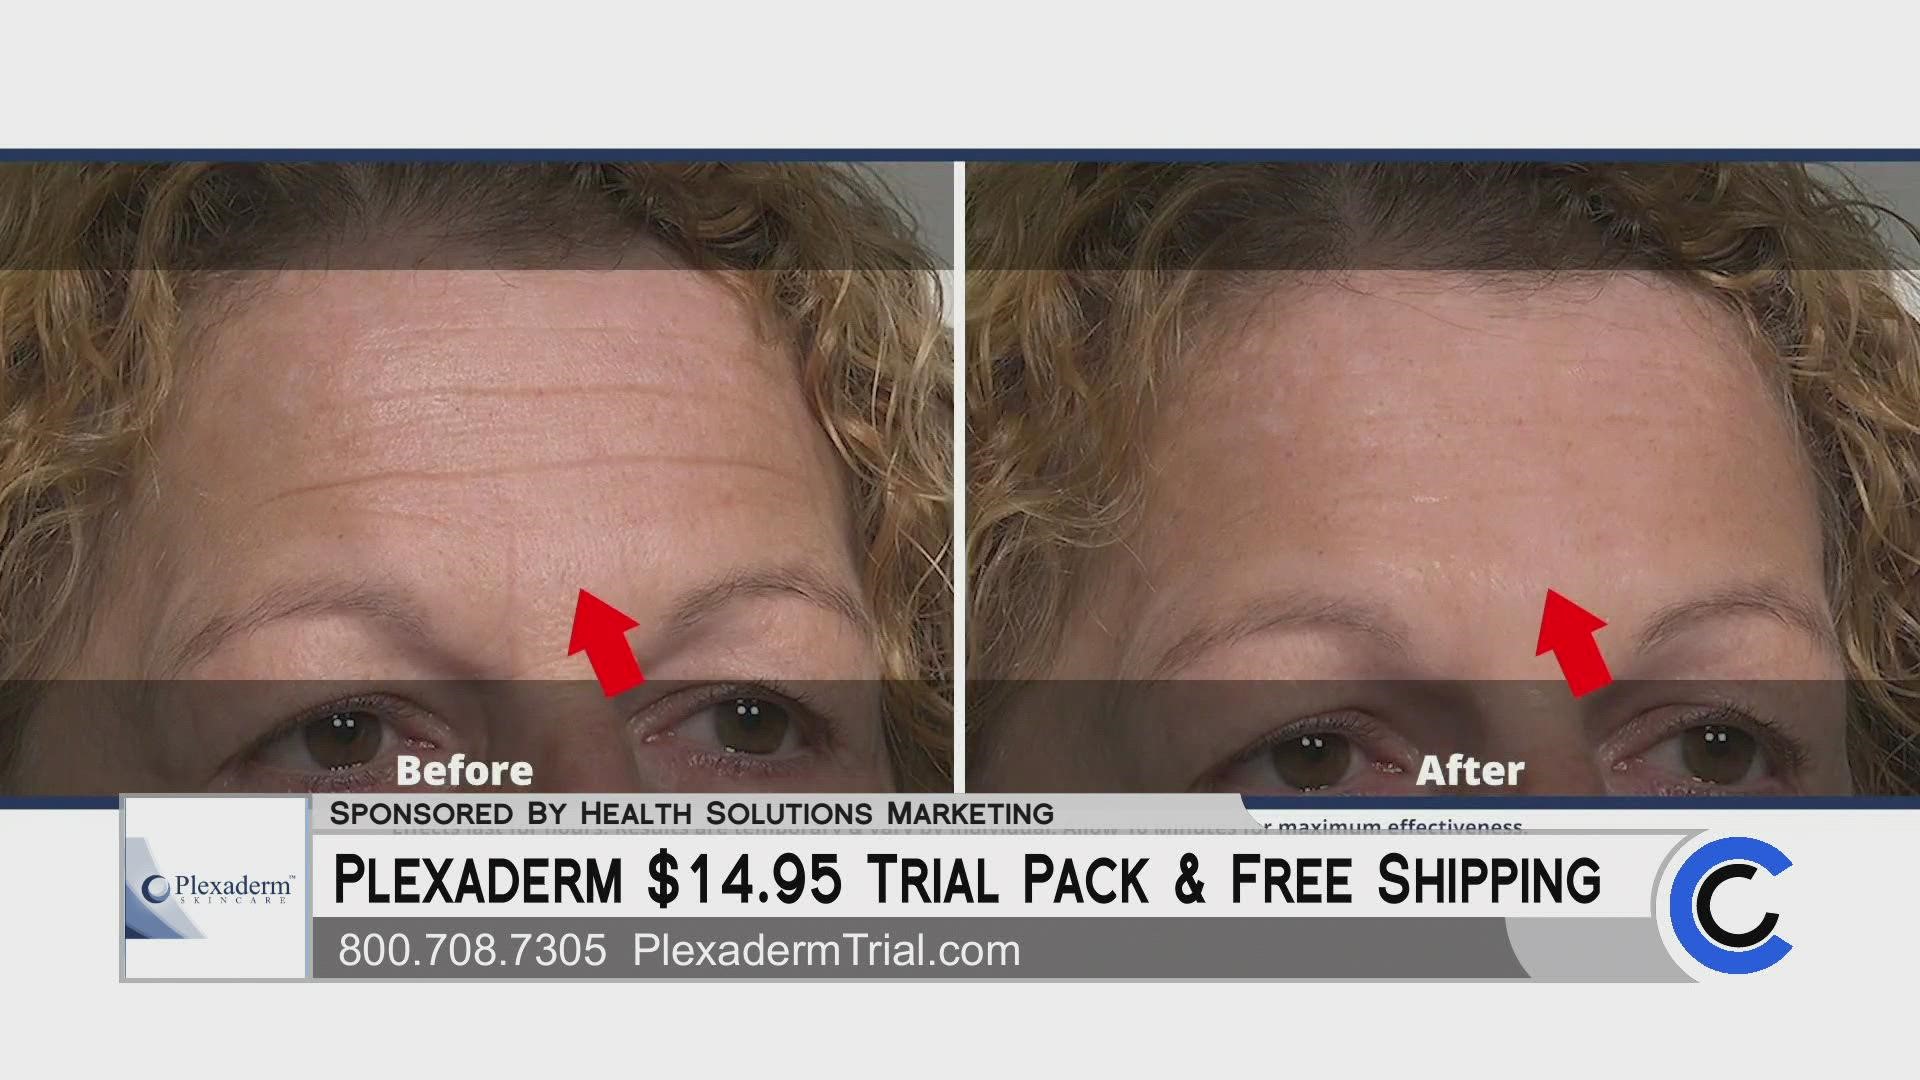 Get free shipping when you try Plexaderm for just $14.95! Visit PlexadermTrial.com or call 800.708.7305. **PAID CONTENT**